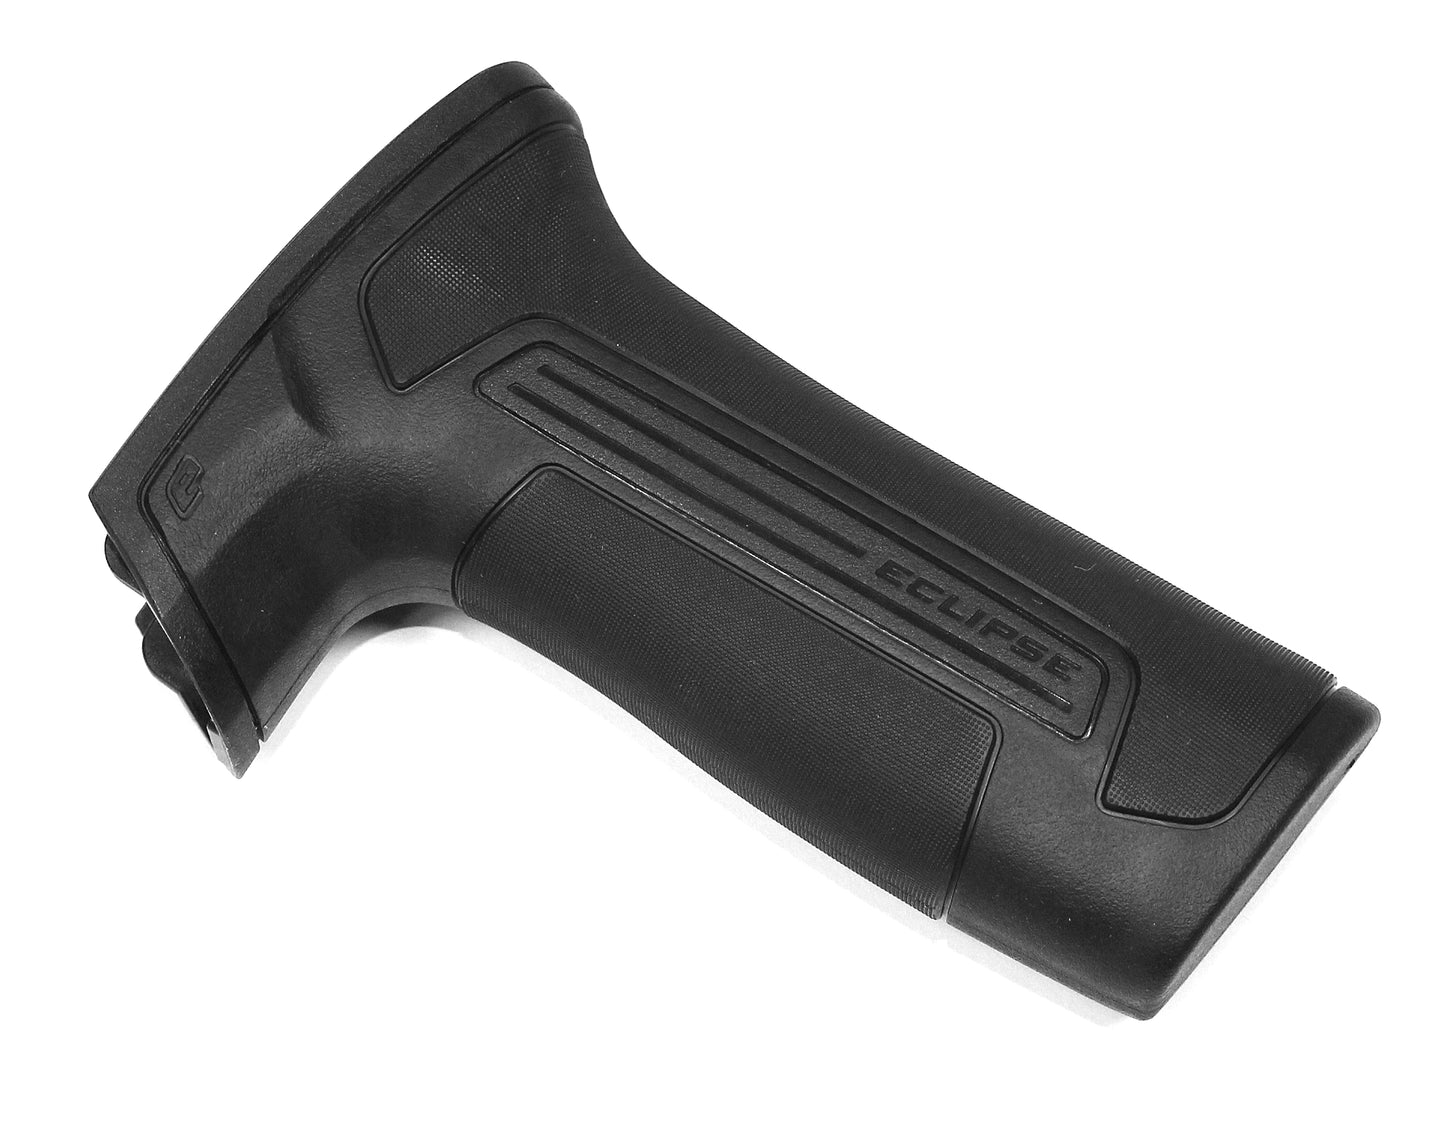 Eclipse CS2 Foregrip Assembly v2